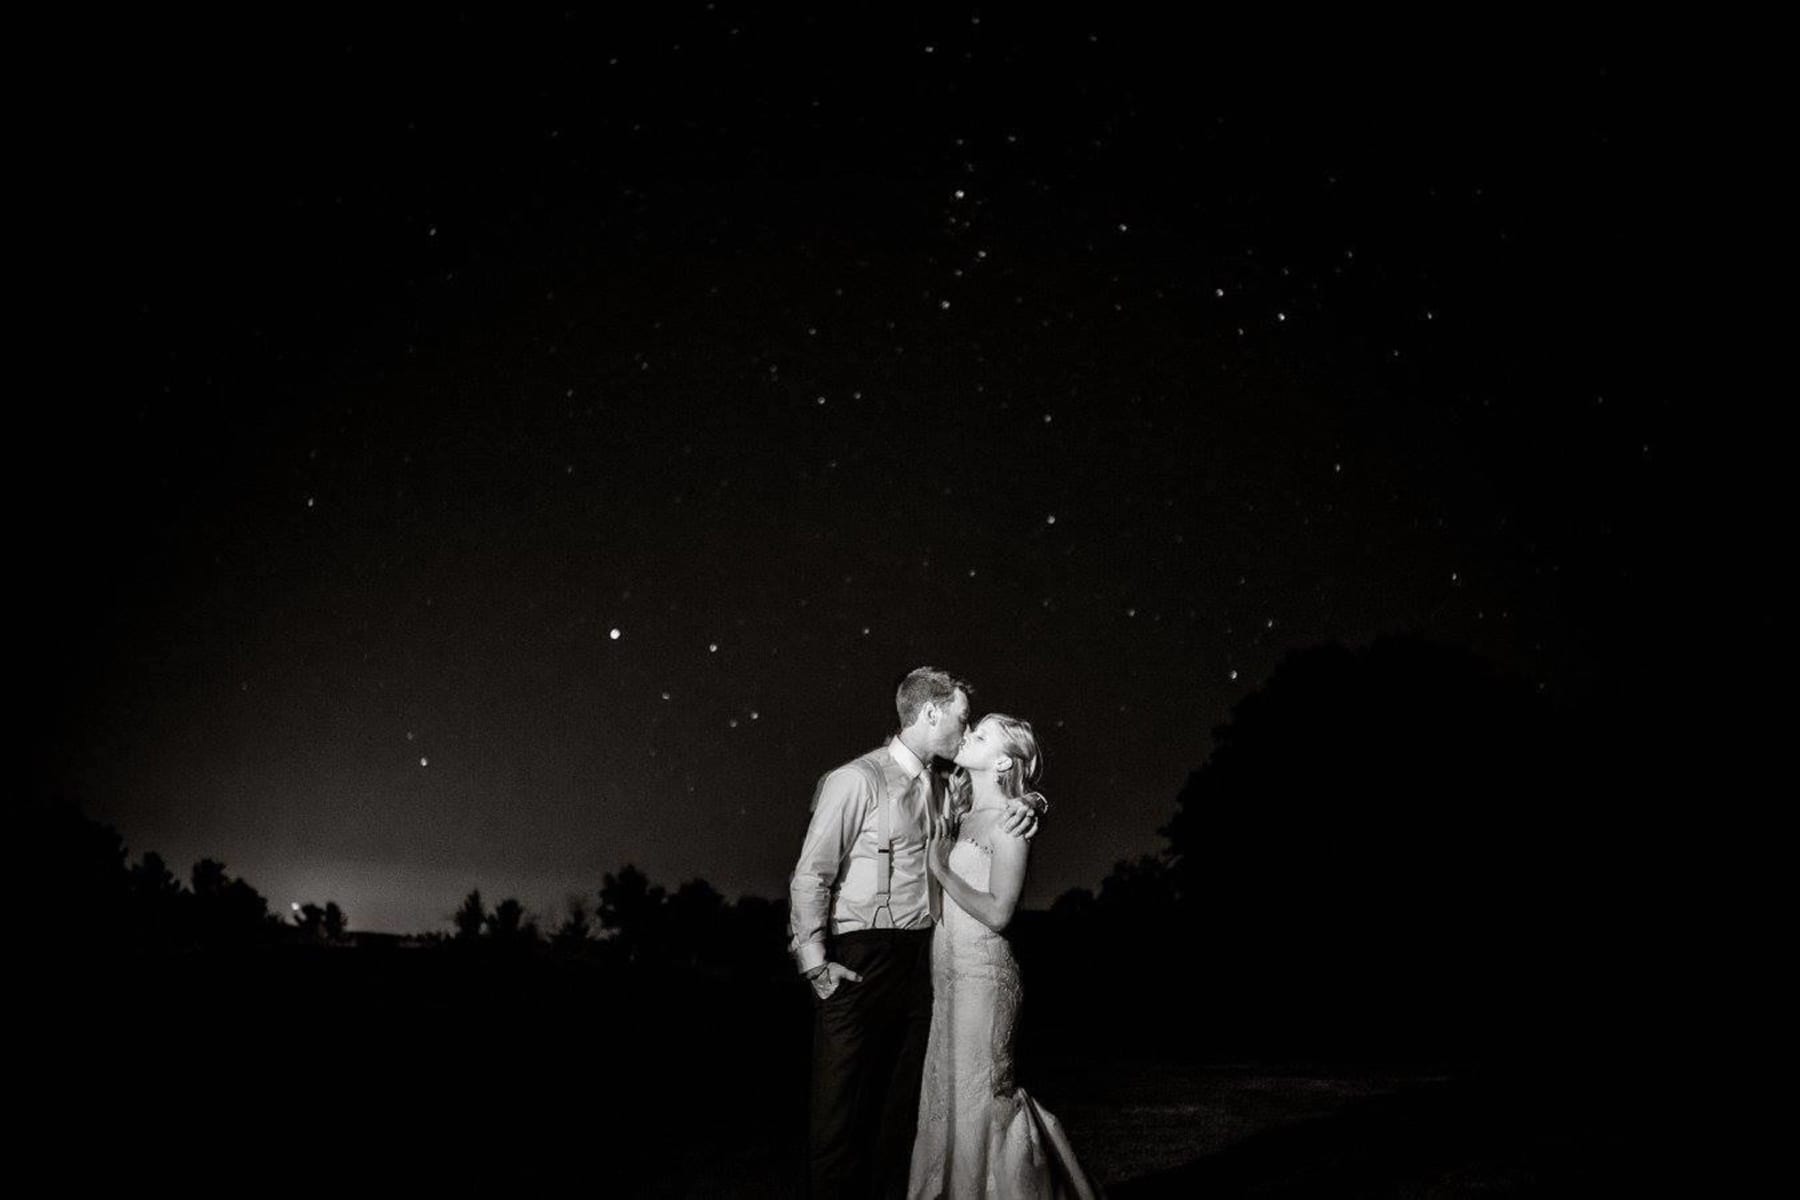 Bride and Groom kissing under a starry sky.